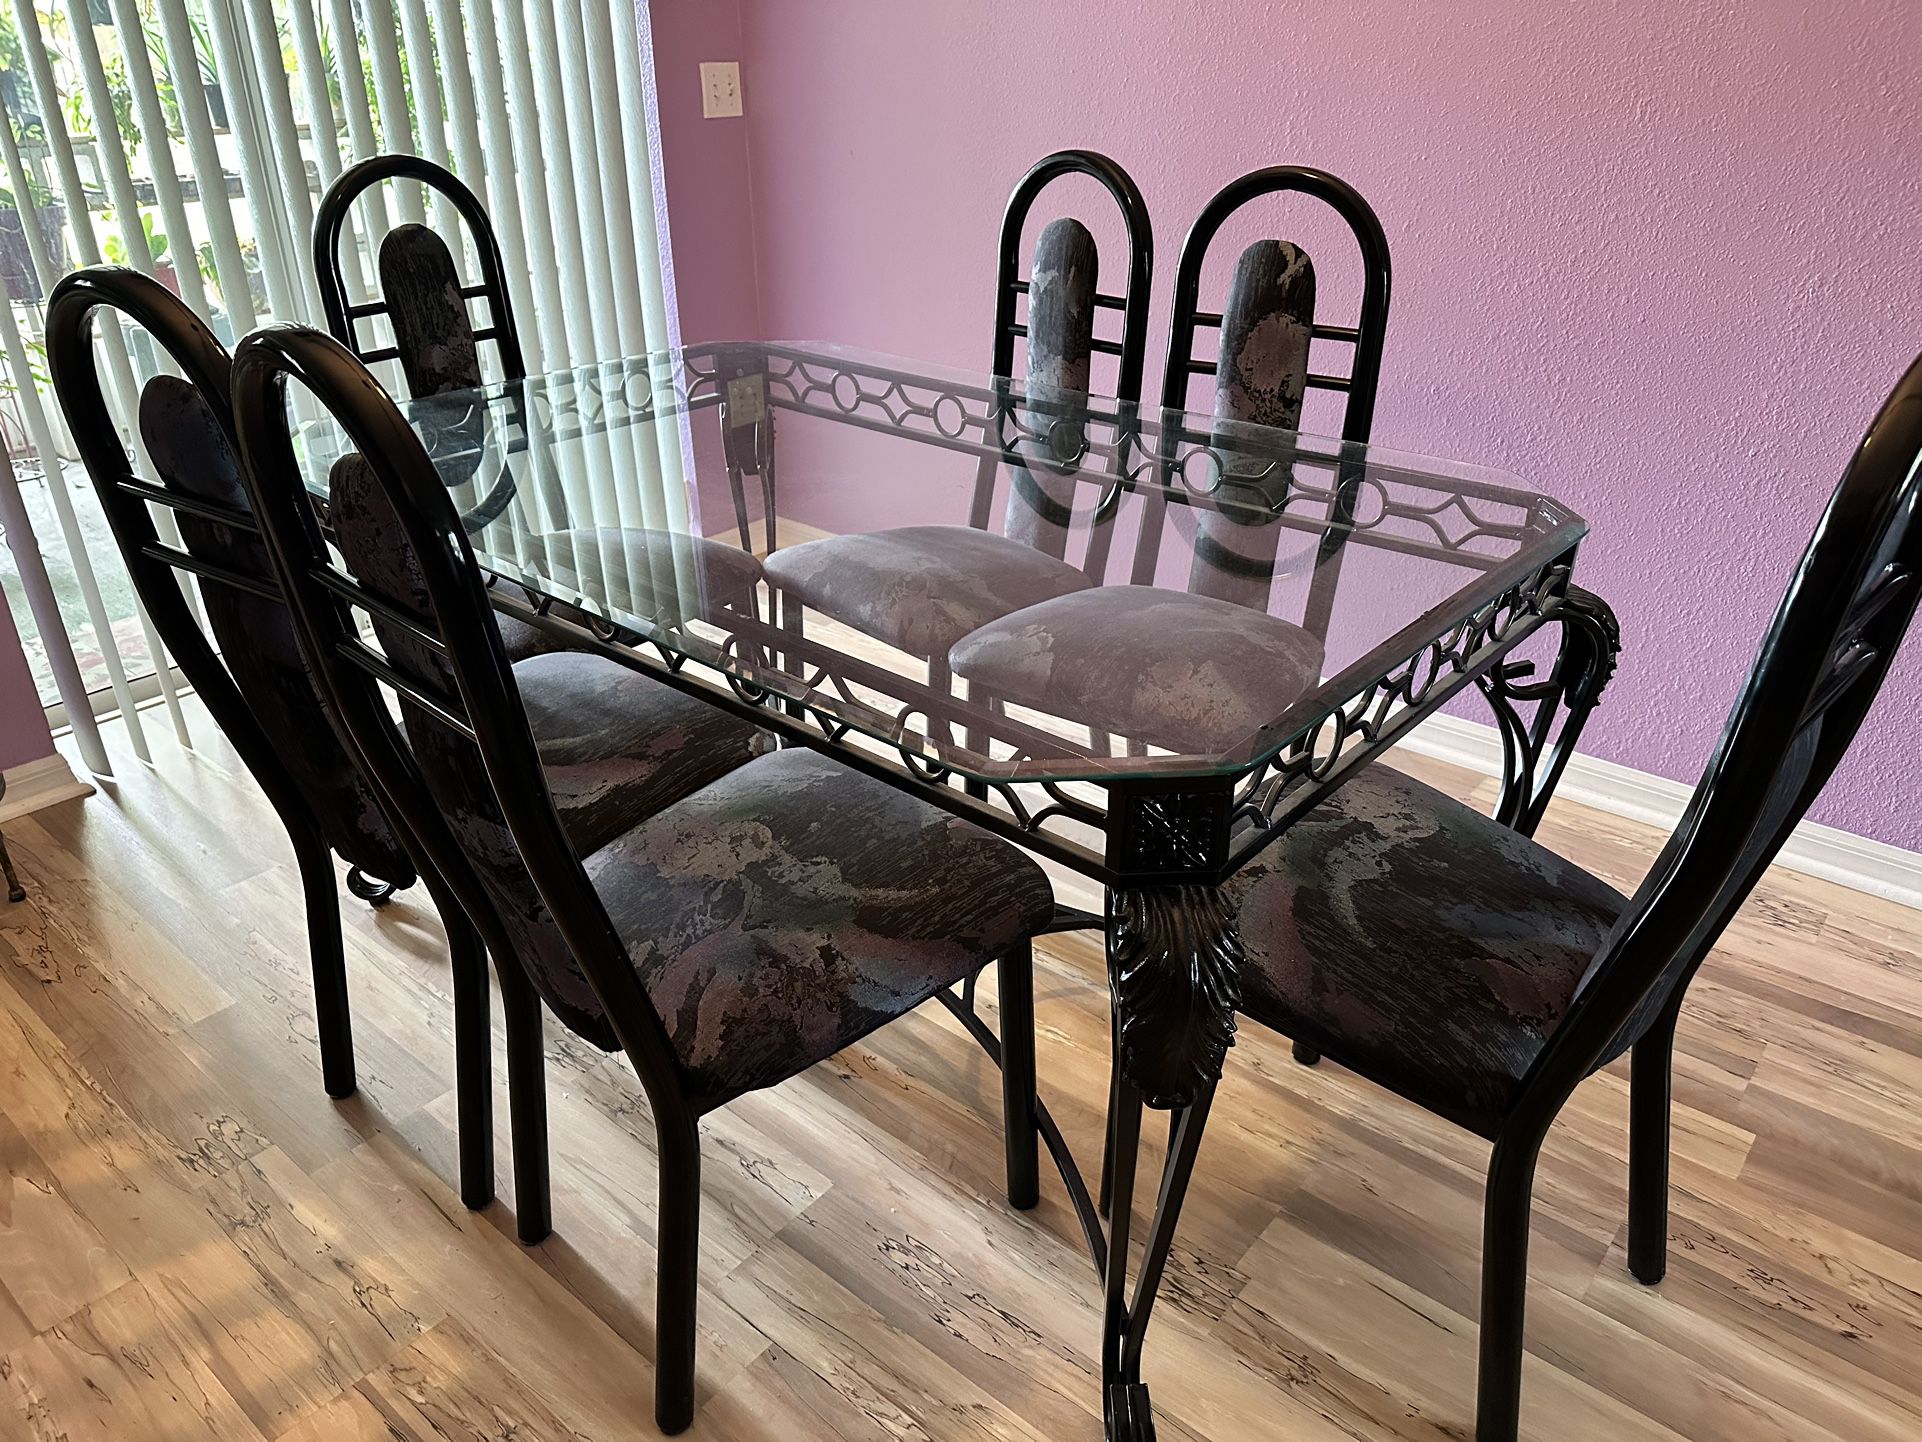 Dining Room Glass Set With 6 Chairs